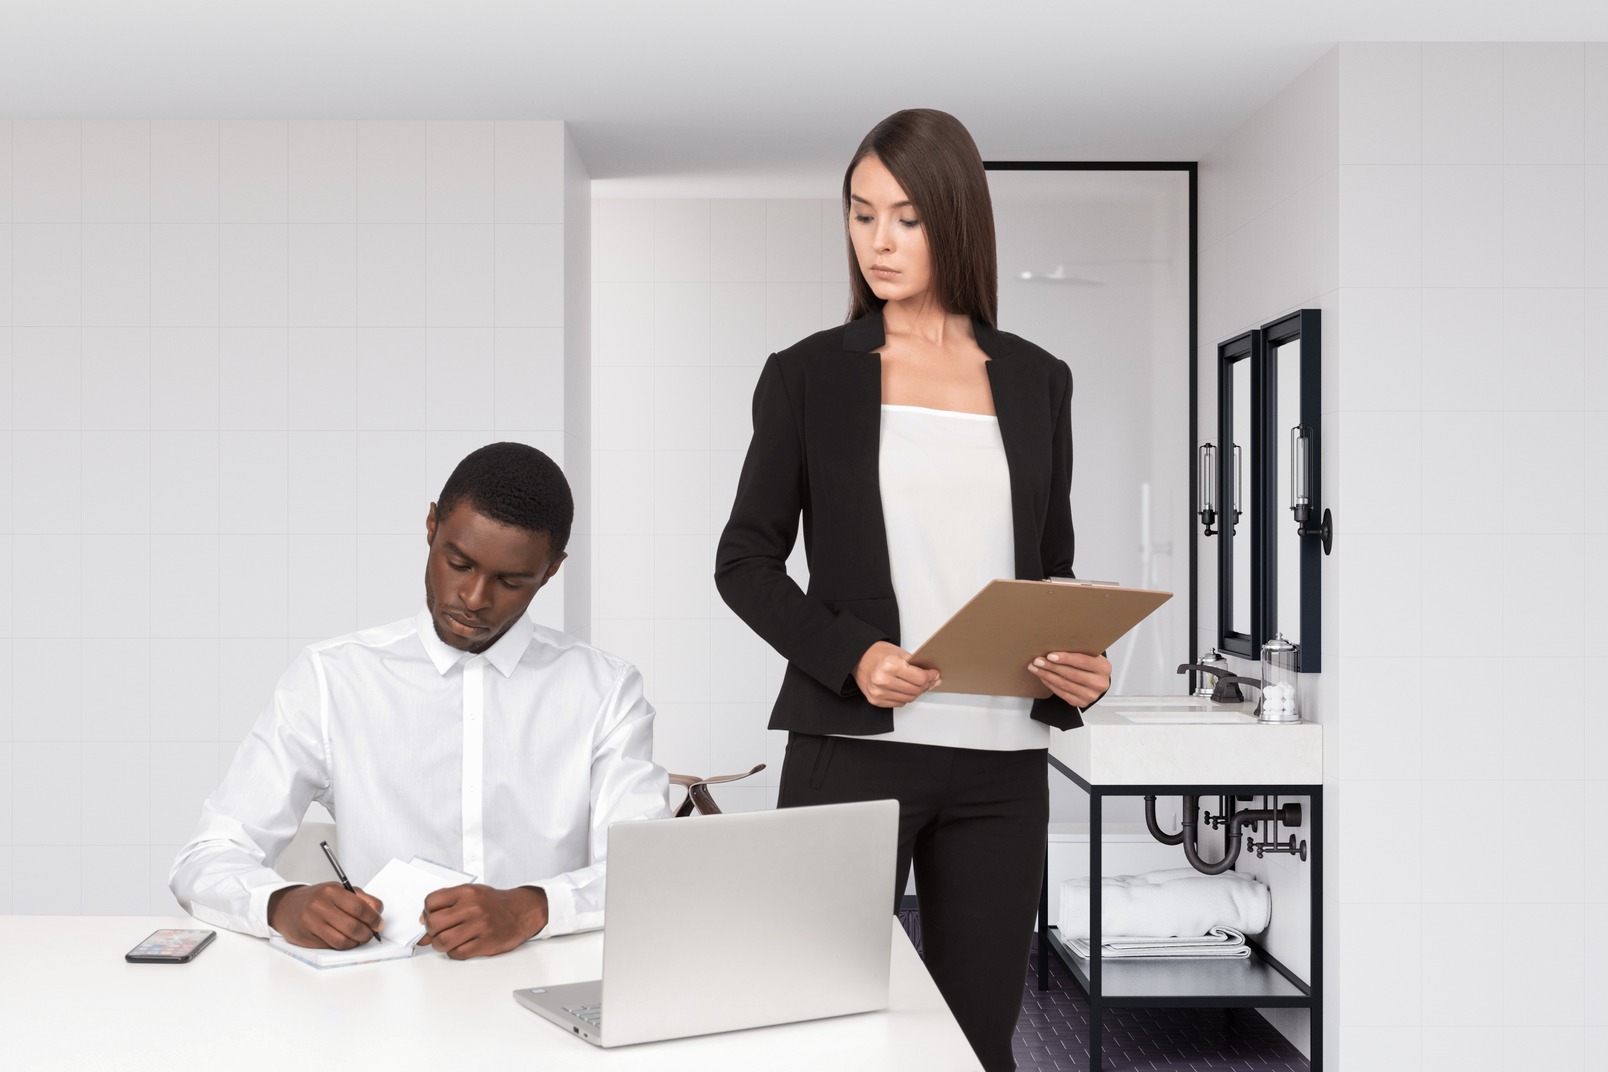 A man and a woman in a modern office